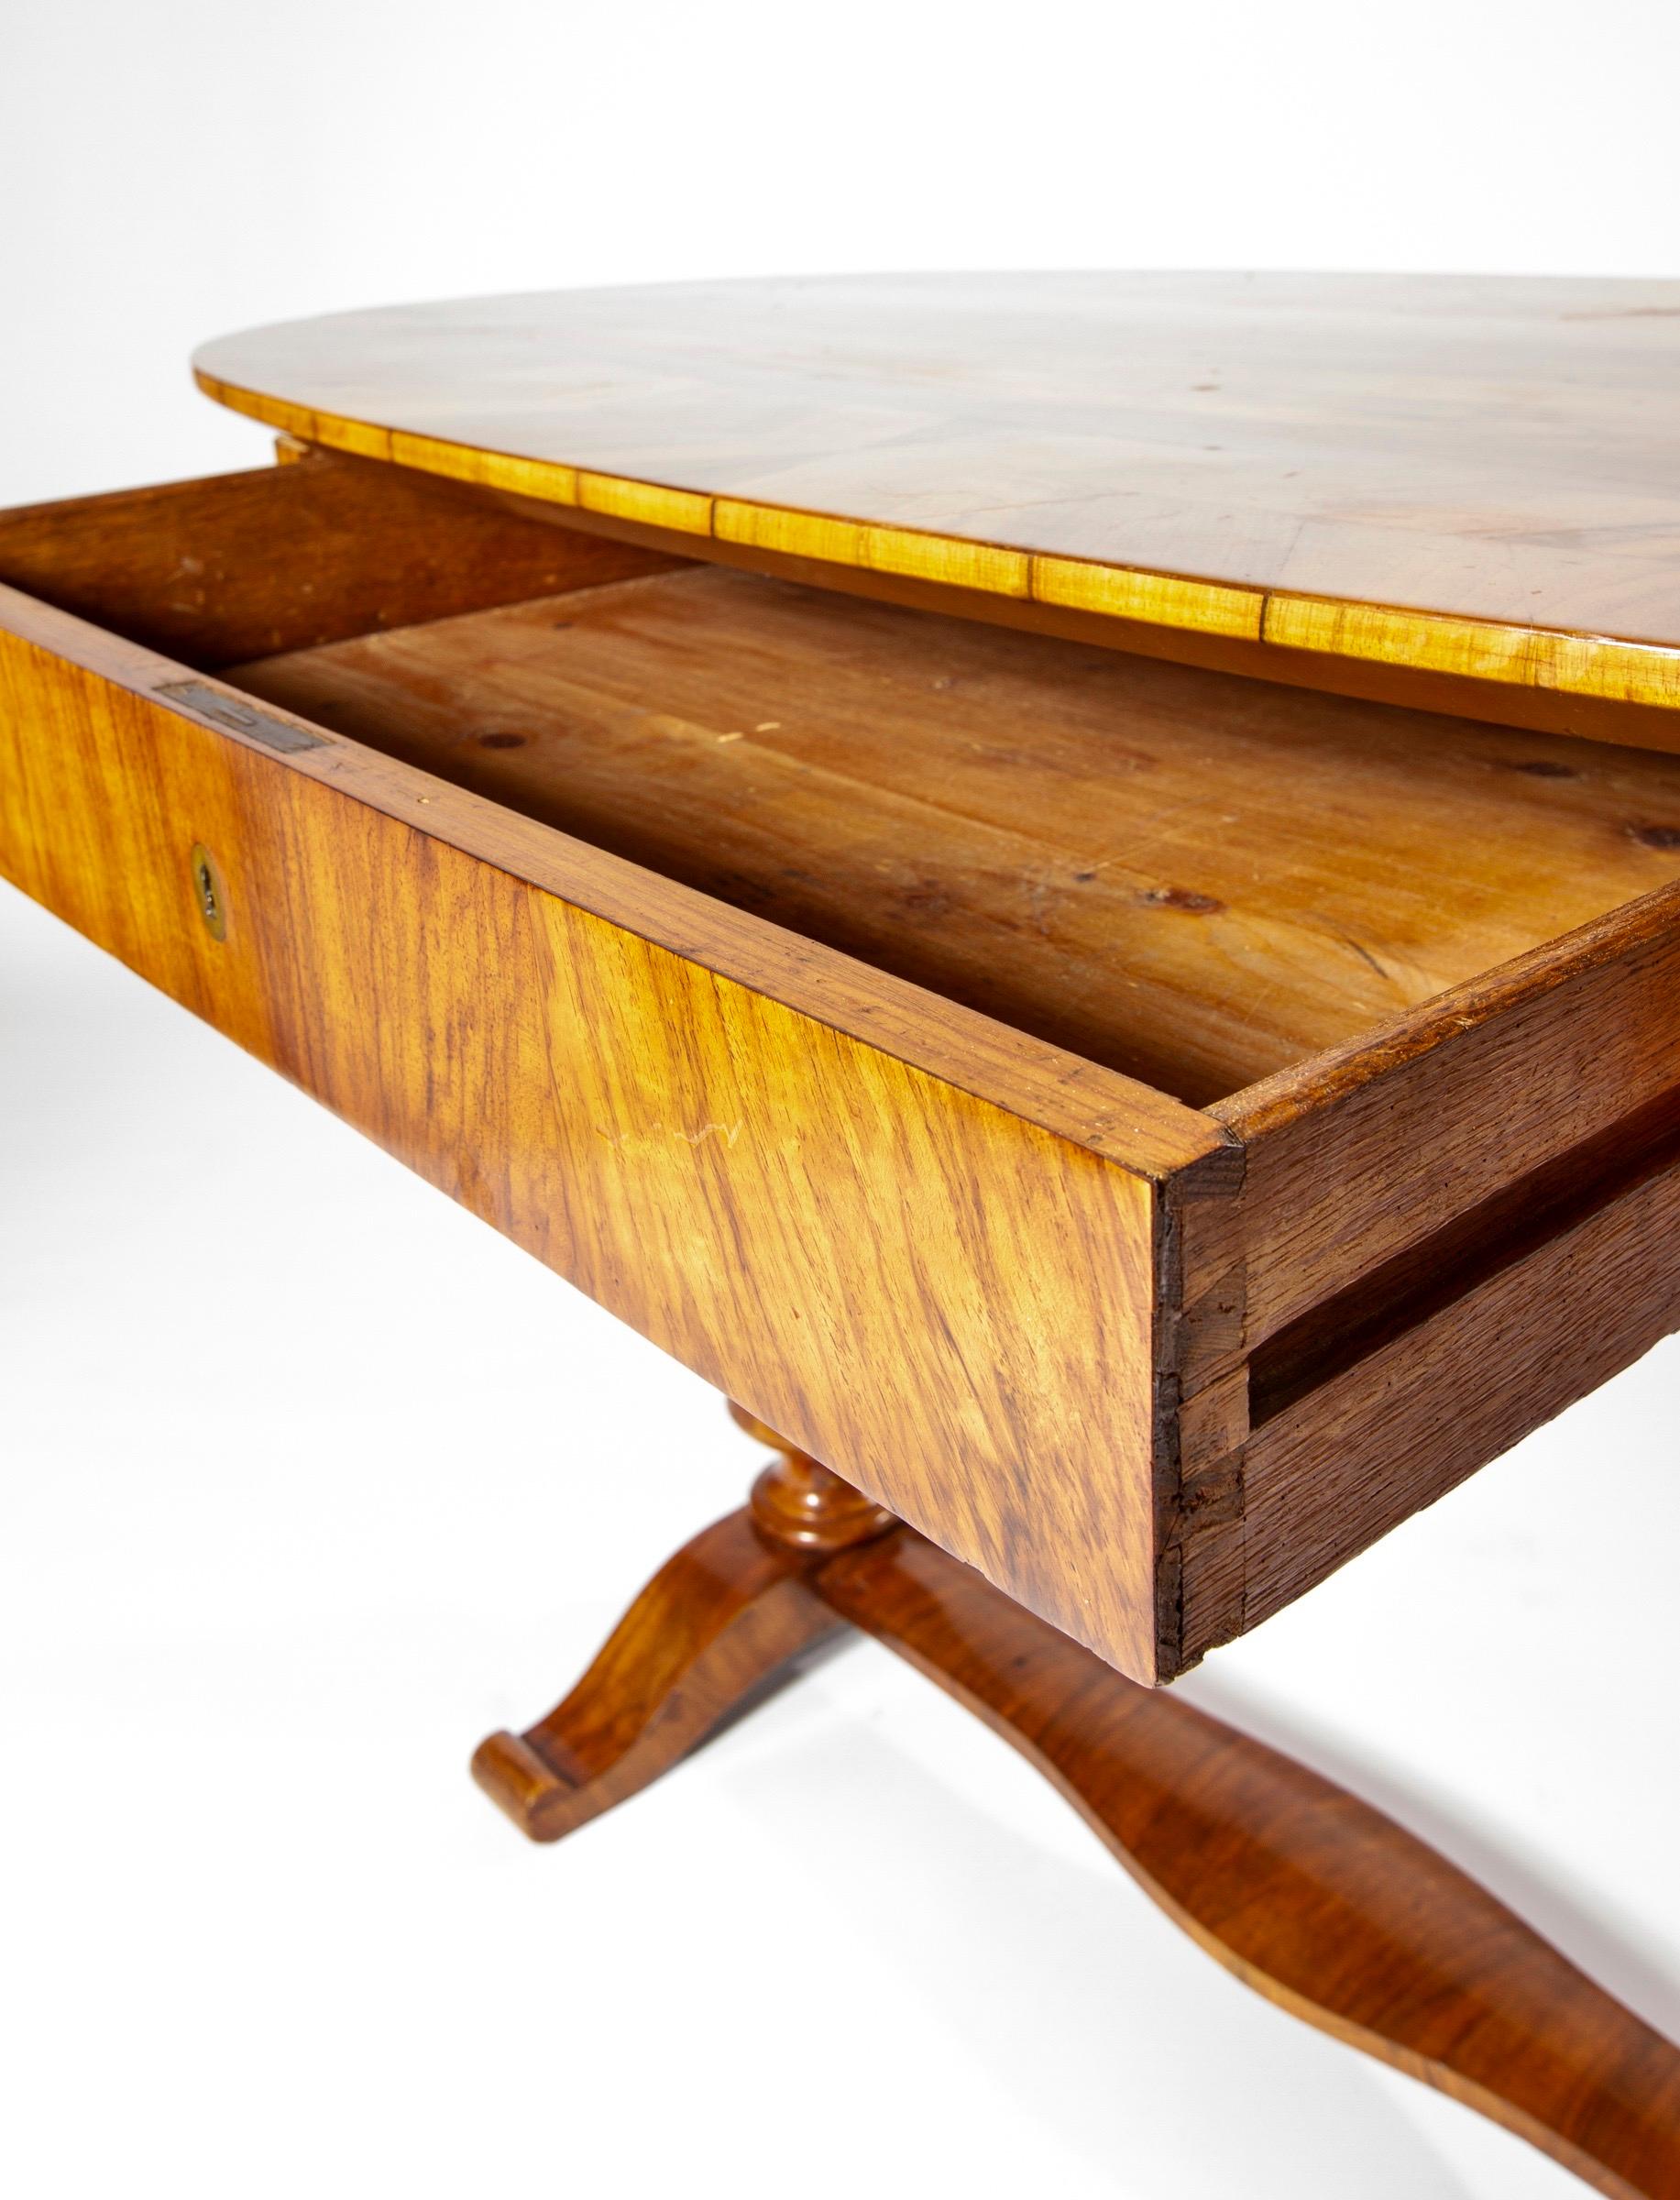 Swedish Biedermeier Oval Desk or Table with Drawer, 19th Century, Sweden  For Sale 8